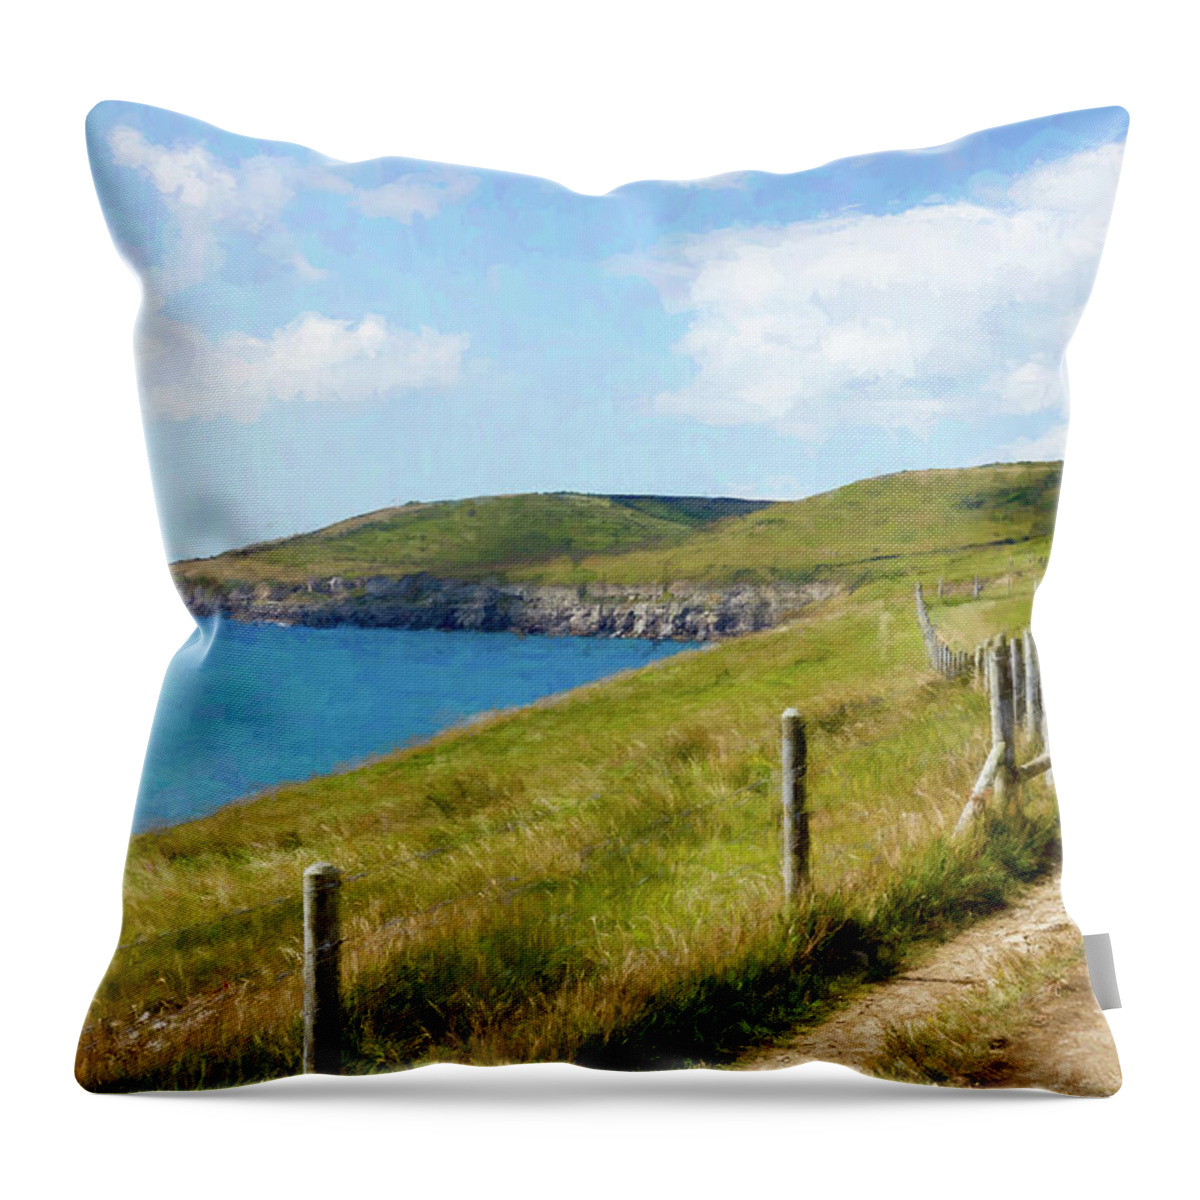 Jurassic Coast Throw Pillow featuring the digital art Pathway Along The Jurassic Coast by Tanya C Smith